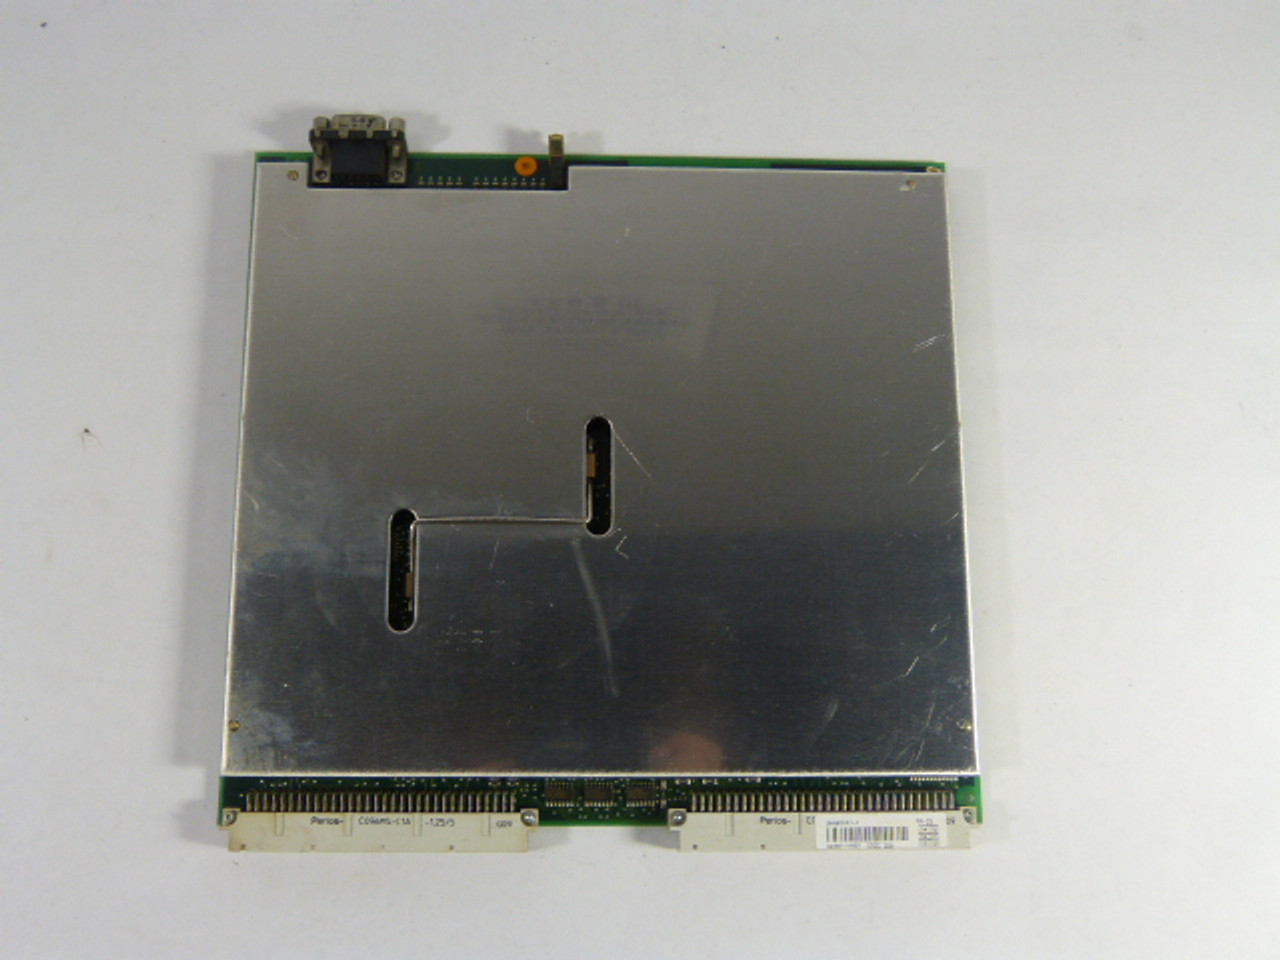 ABB 3HAB2241-1 Main CPU Board 25MHZ No Cover Plate ! AS IS !